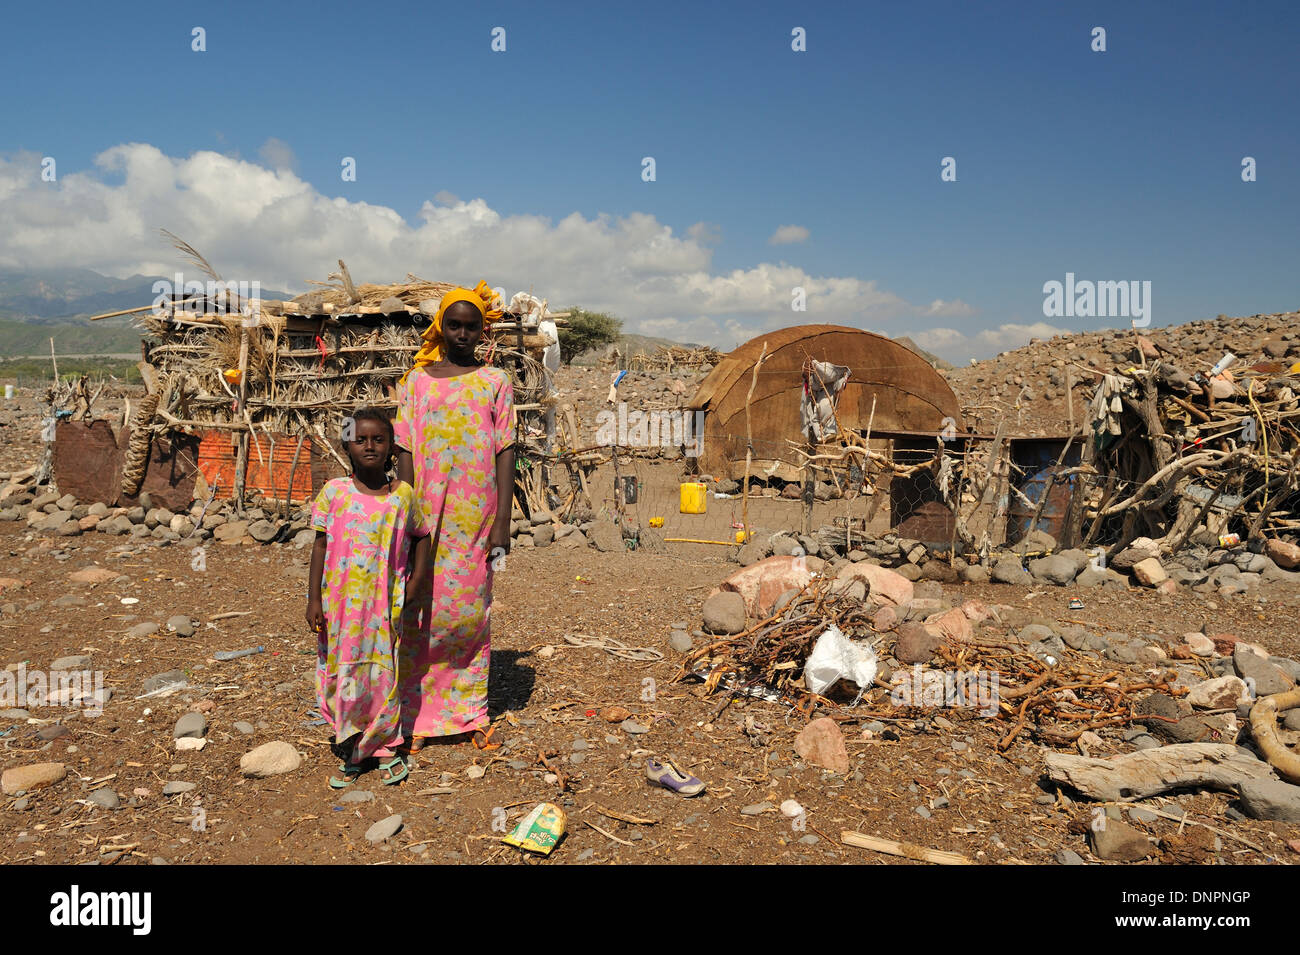 Two Djiboutian girls posing in a village in northern Djibouti, Horn of Africa Stock Photo